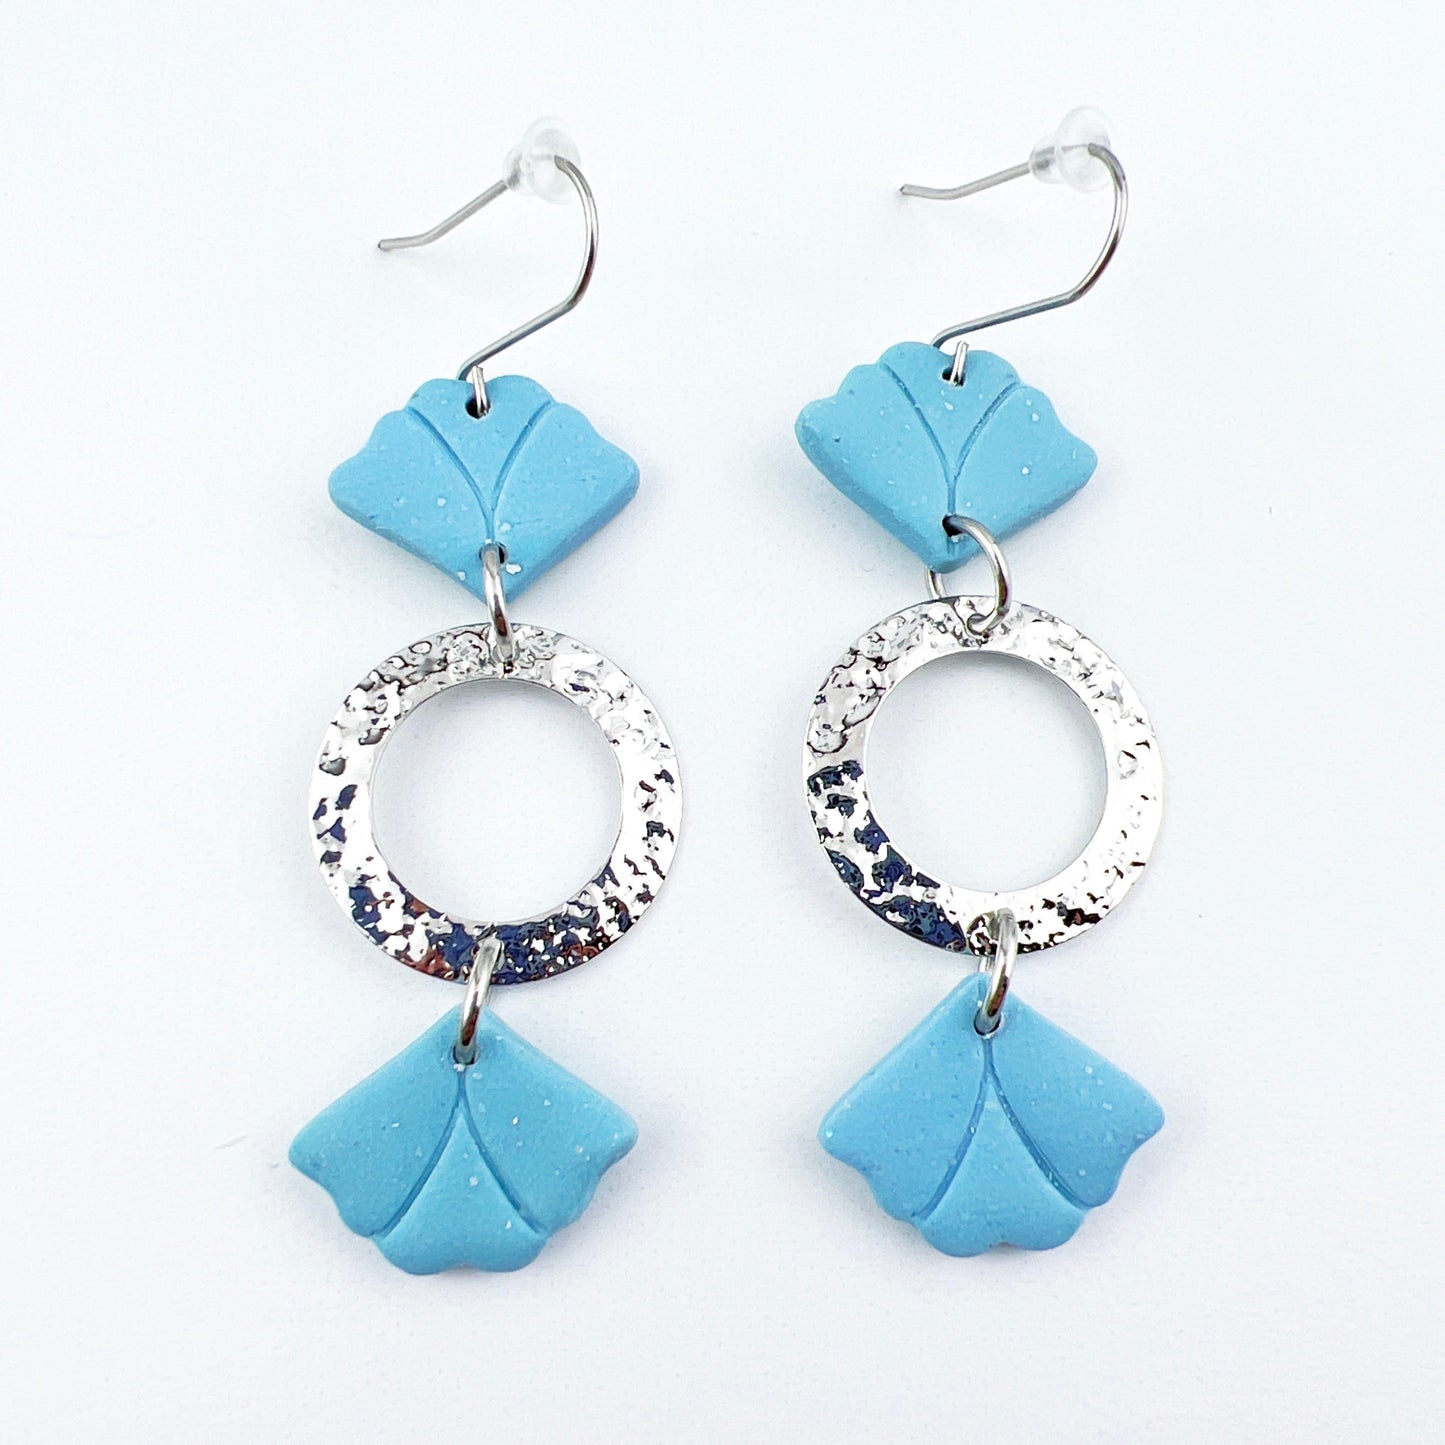 Earrings Sema - Blue Floral Leaf Earrings with Hammered Circles